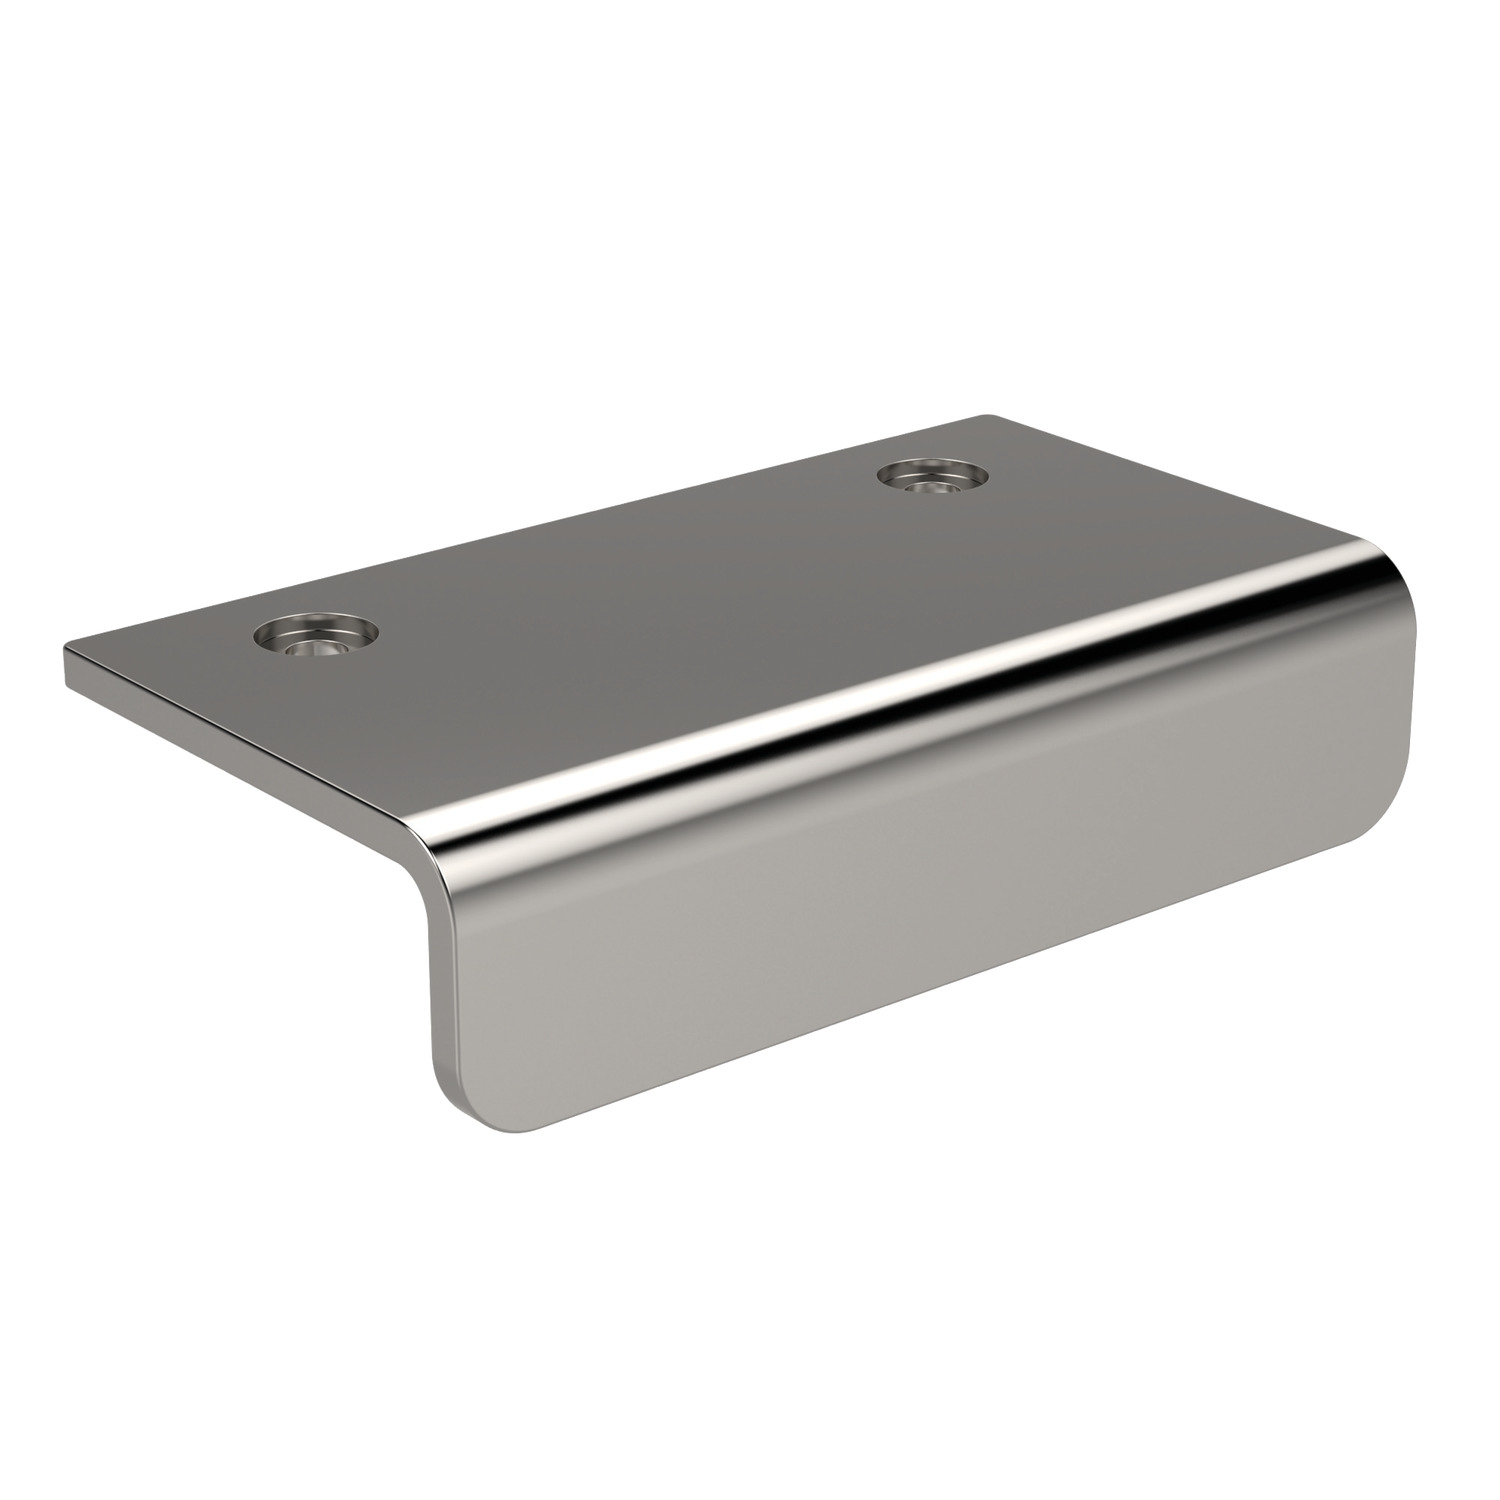 79590.W0070 Ledge Pulls - Stainless Steel 70 - 17 - 38 - 8